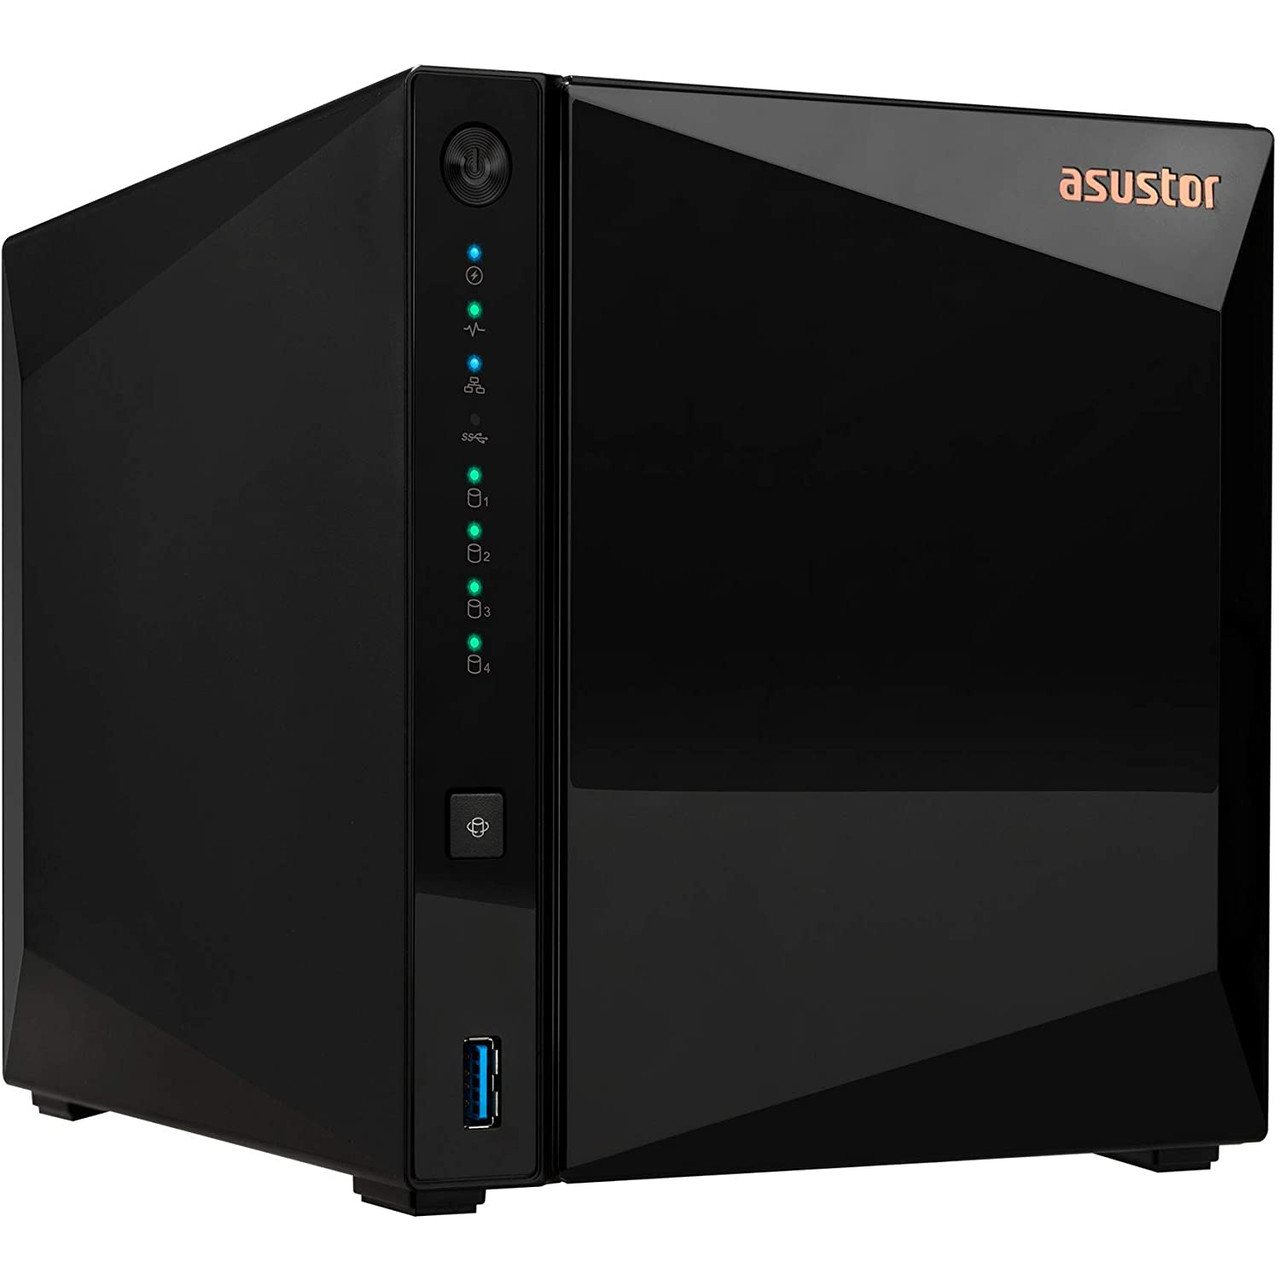 Asustor AS3304T Drivestor 4 Pro Network Attached Storage,1.4GHz Quad Core,2.5GbE Port, 2GB RAM DDR4 (4 Bay Diskless NAS)